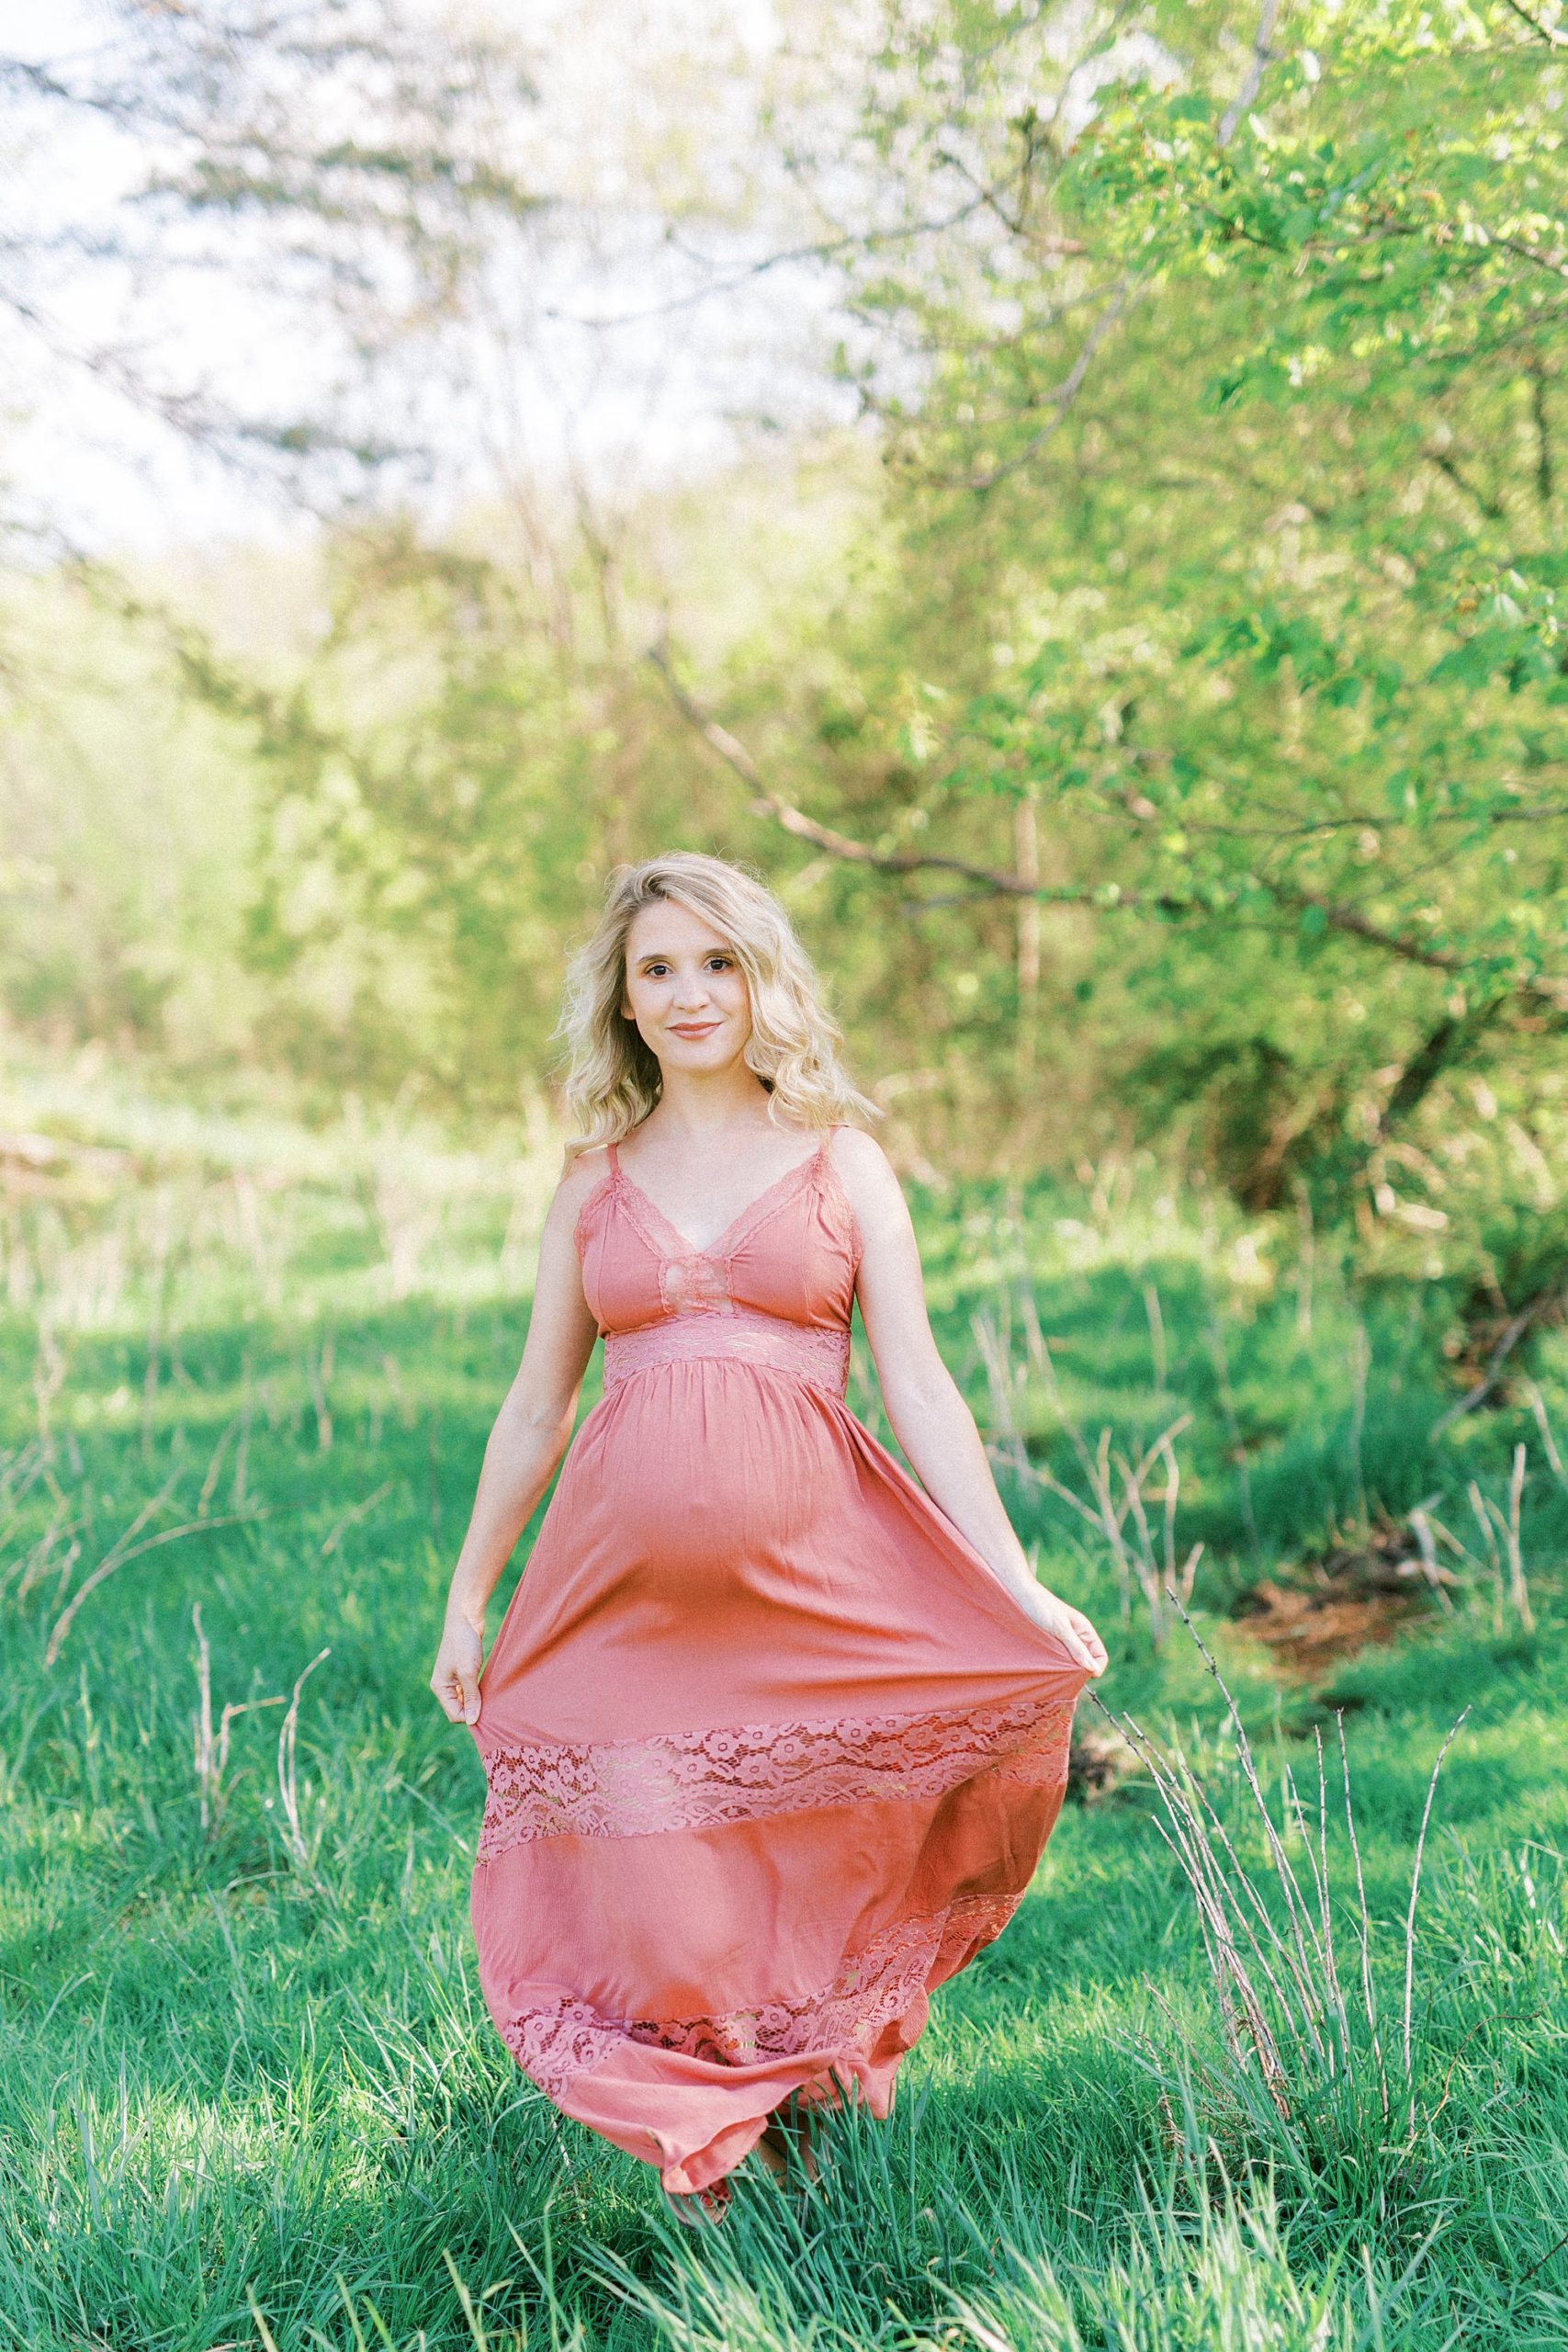 woman in pink sundress holds dress and walks forward